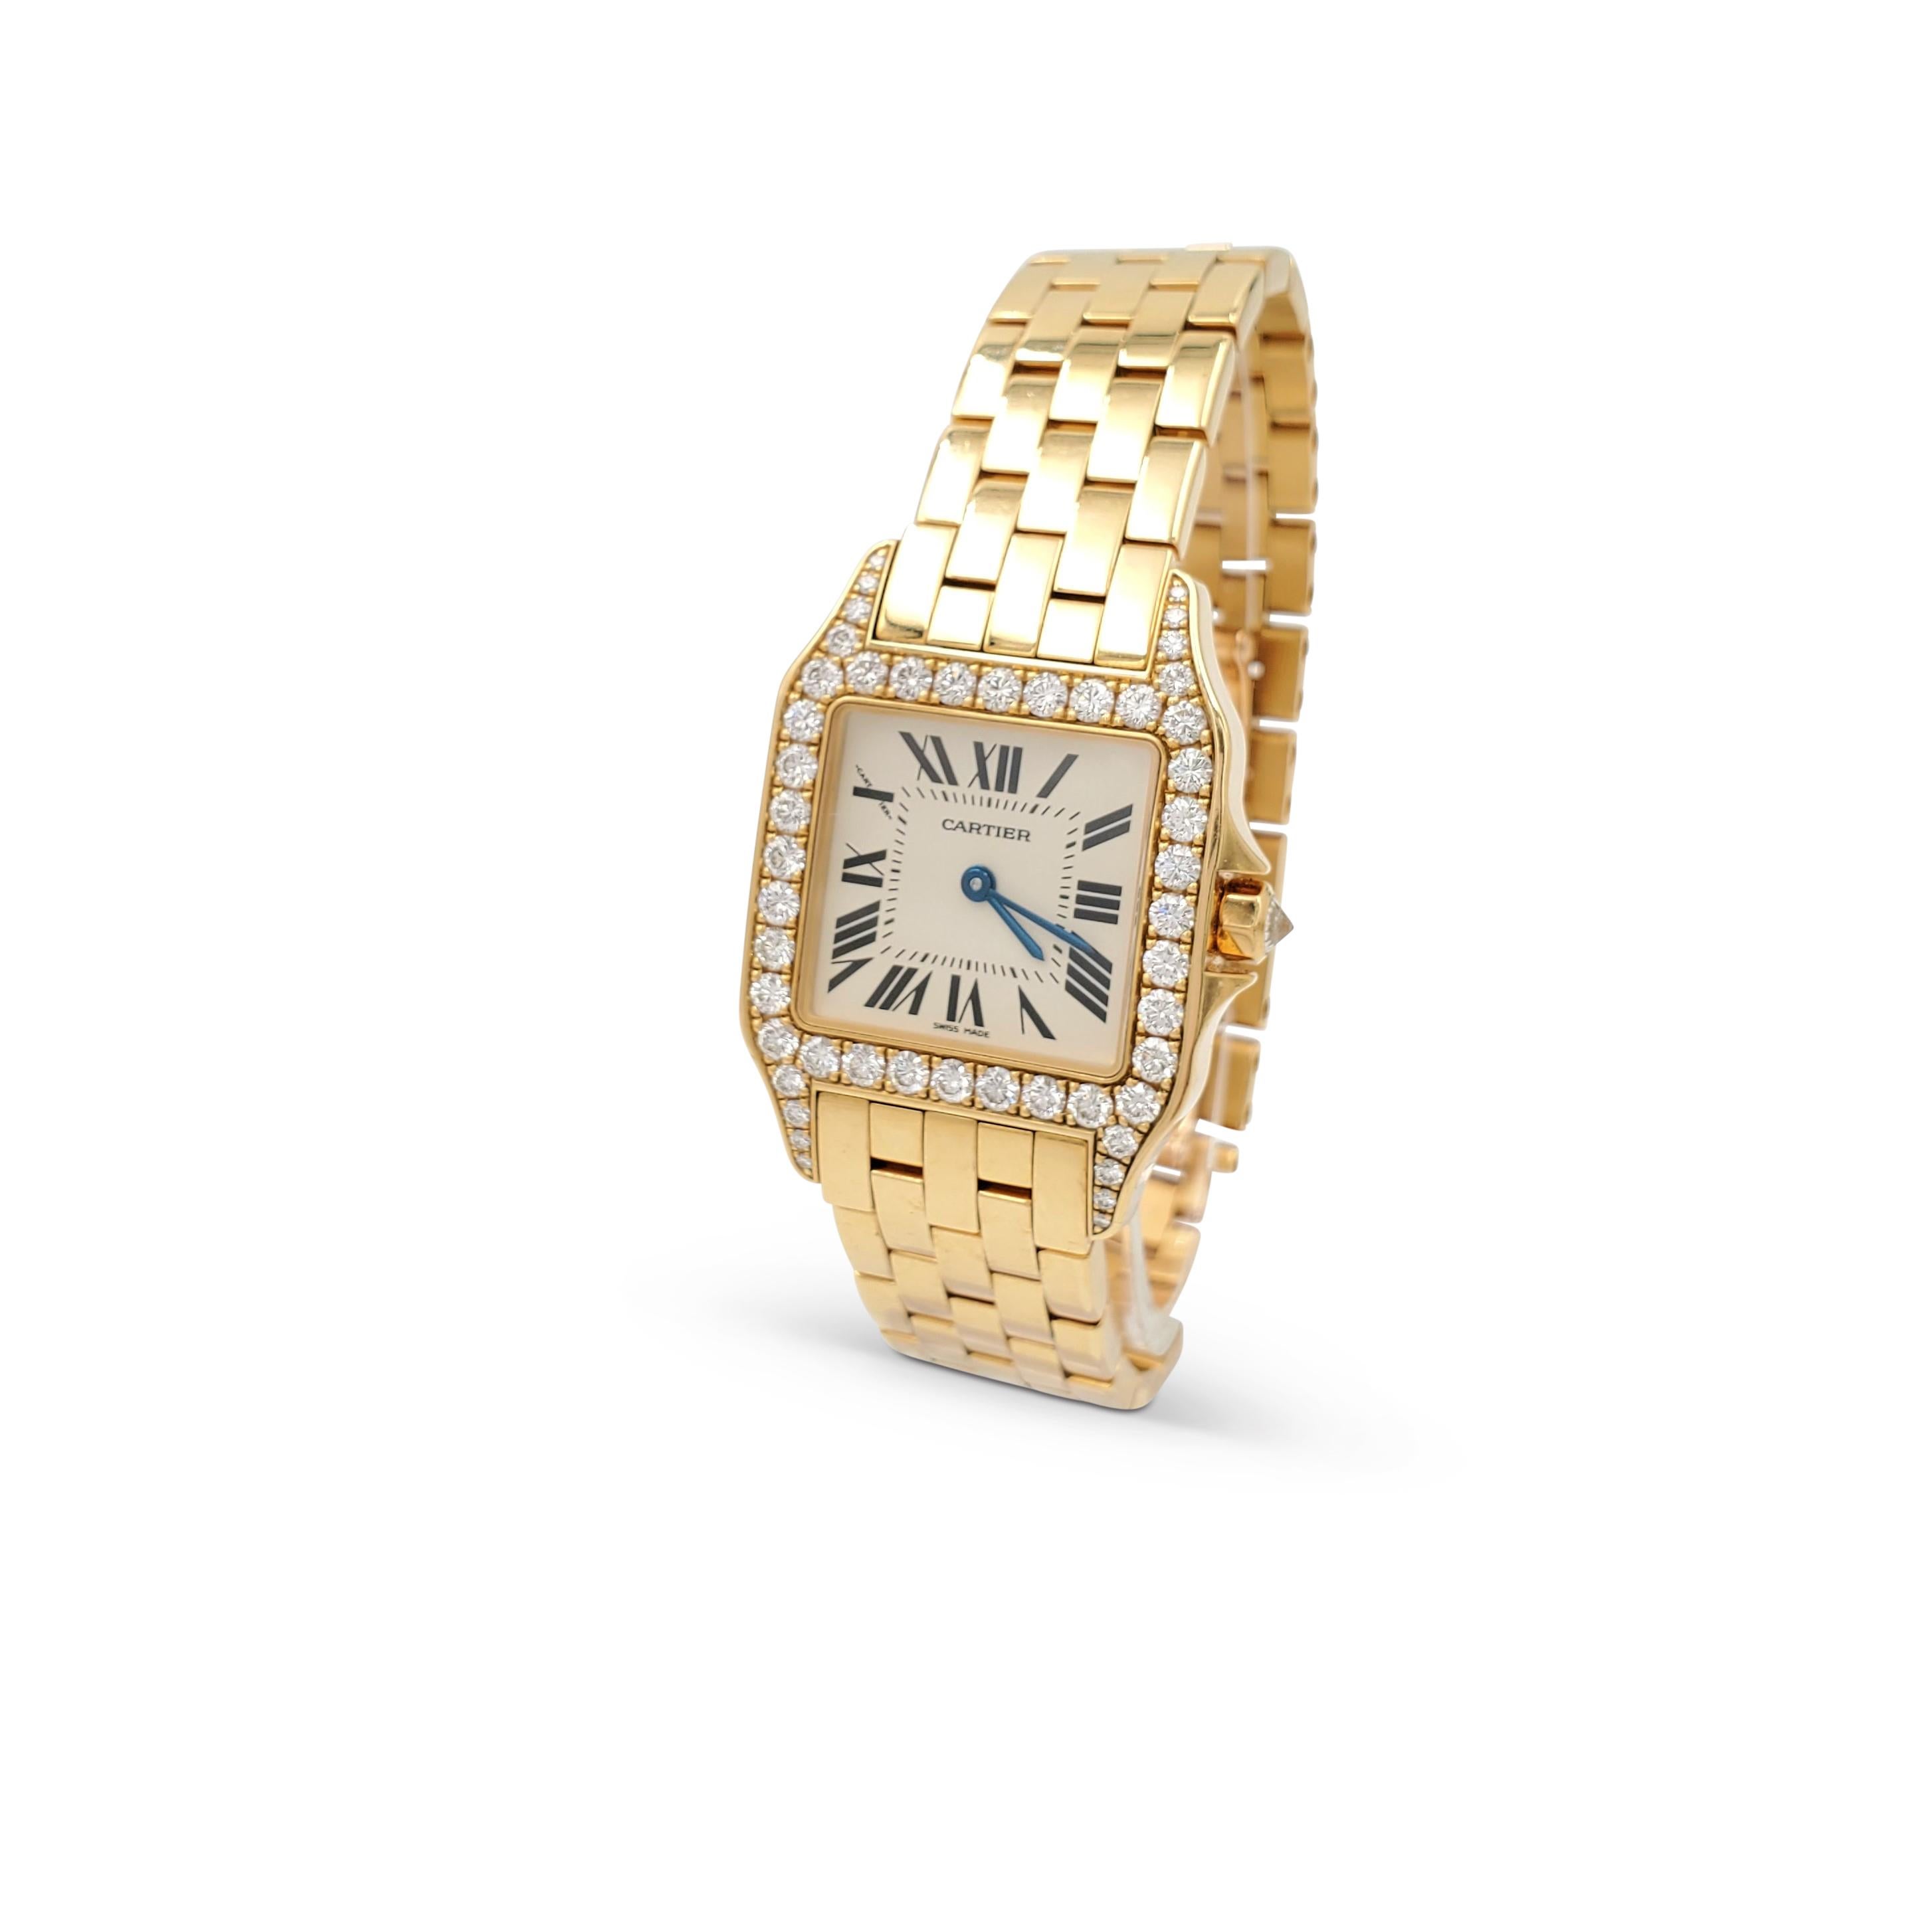 Authentic Cartier Santos Demoiselle watch crafted in 18 karat yellow gold. The octagonal case (37 mm x 26 mm) is set with an estimated 1.30 carats of high-quality round brilliant cut diamonds. Cream dial with painted black roman numerals and